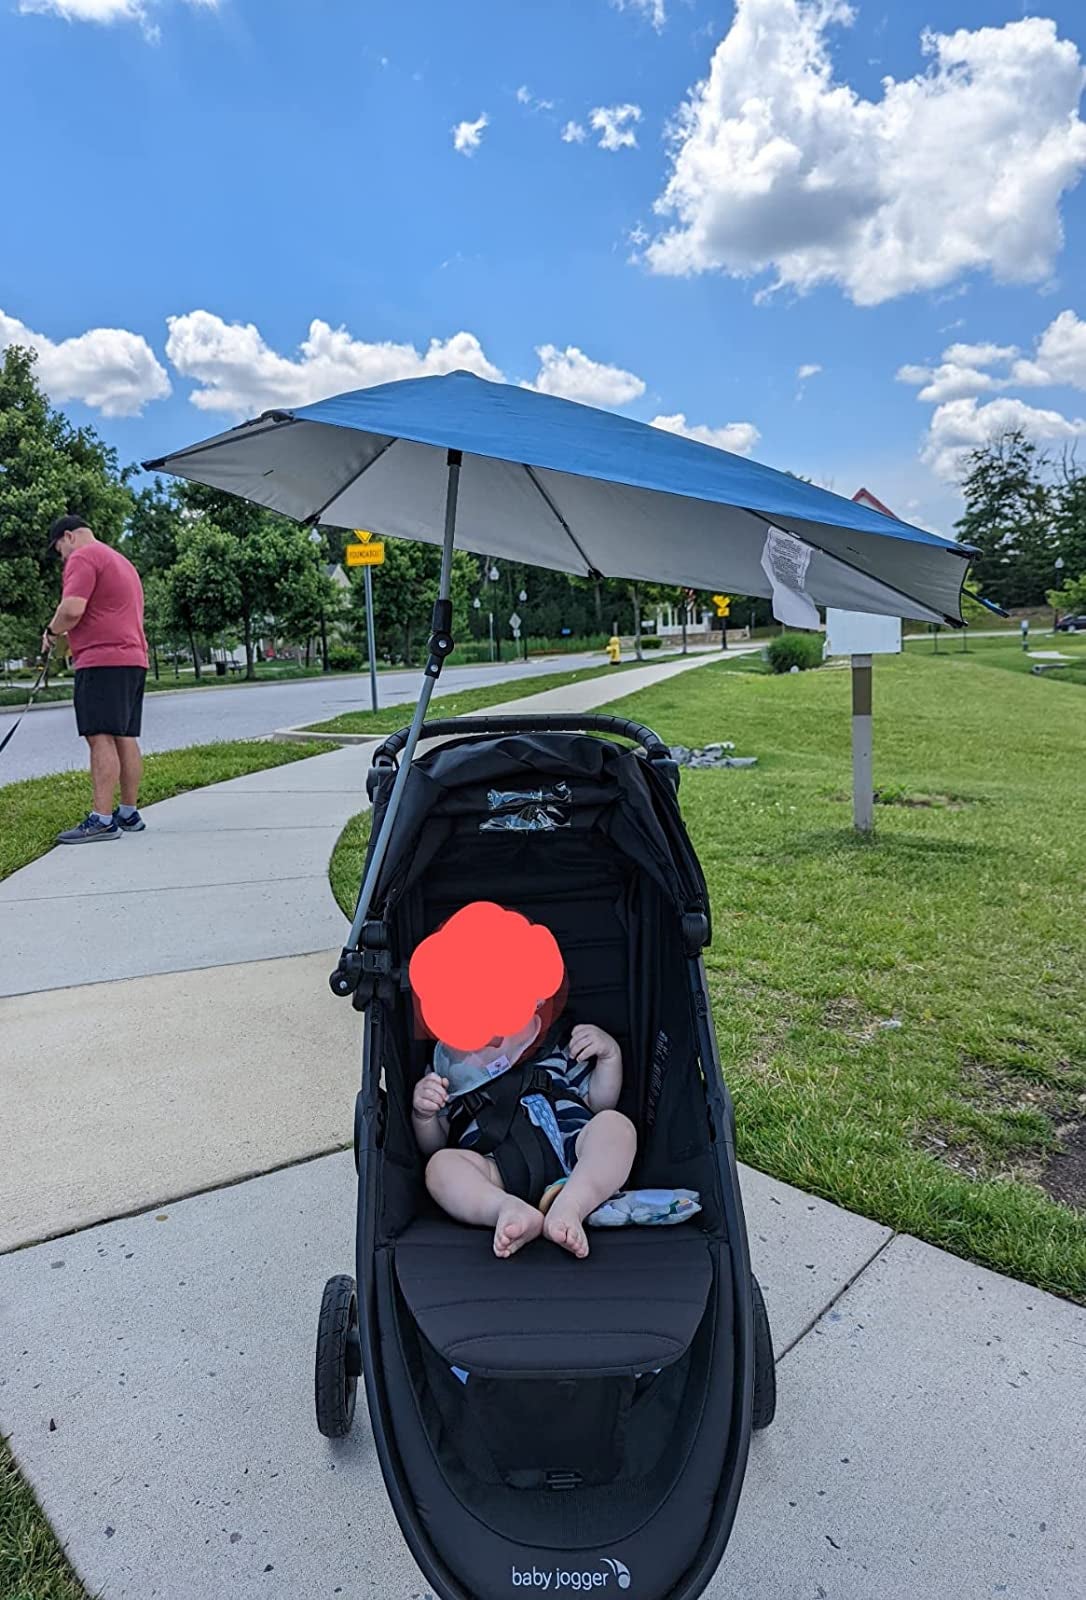 reviewer's photo of a blue umbrella attached to a stroller